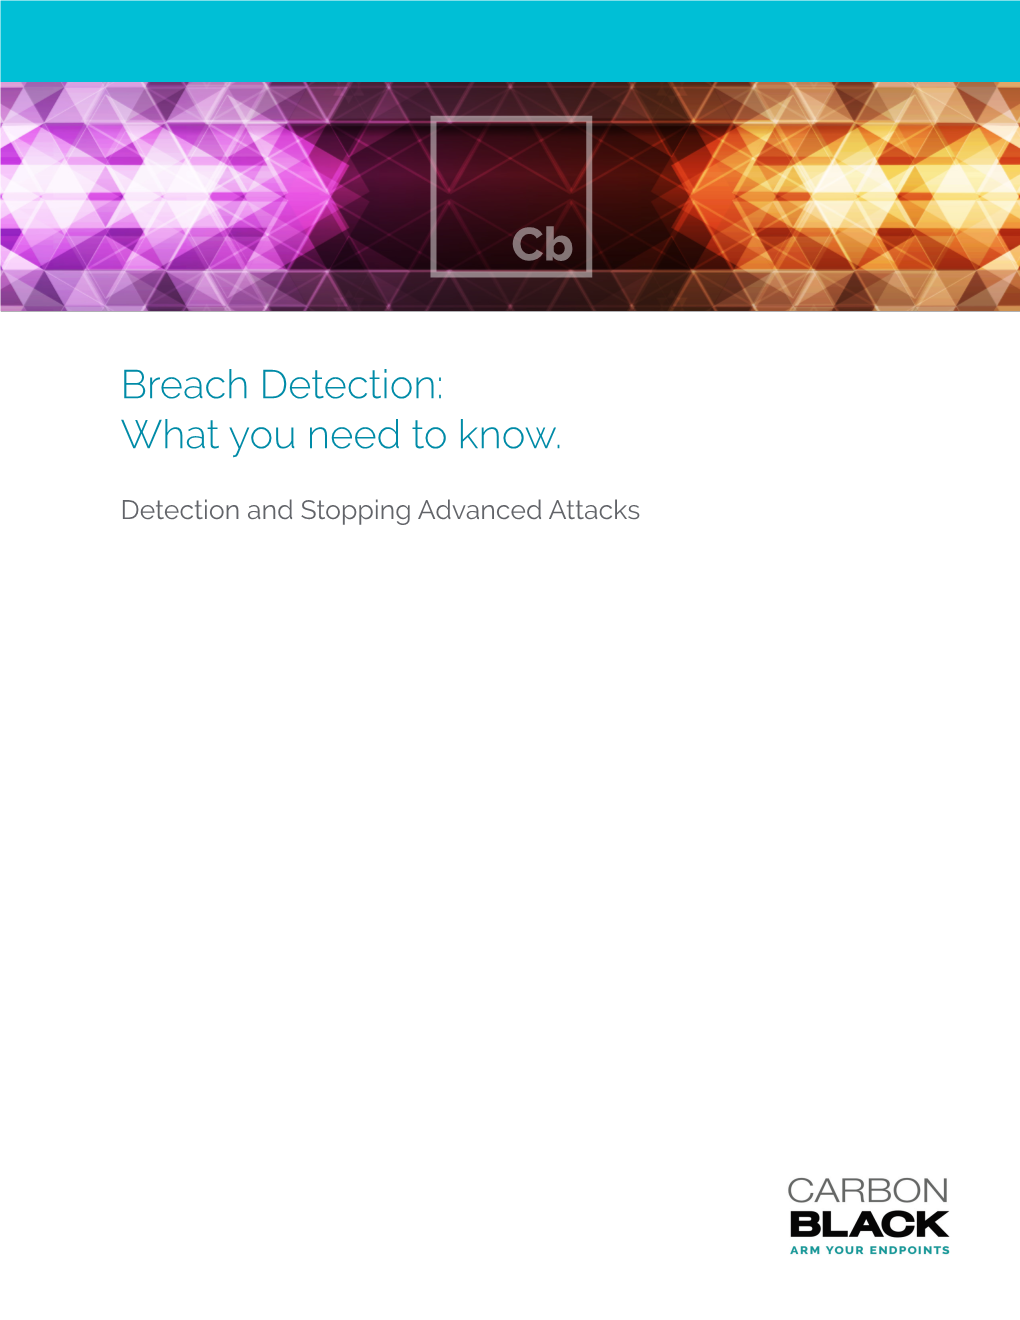 Breach Detection: What You Need to Know